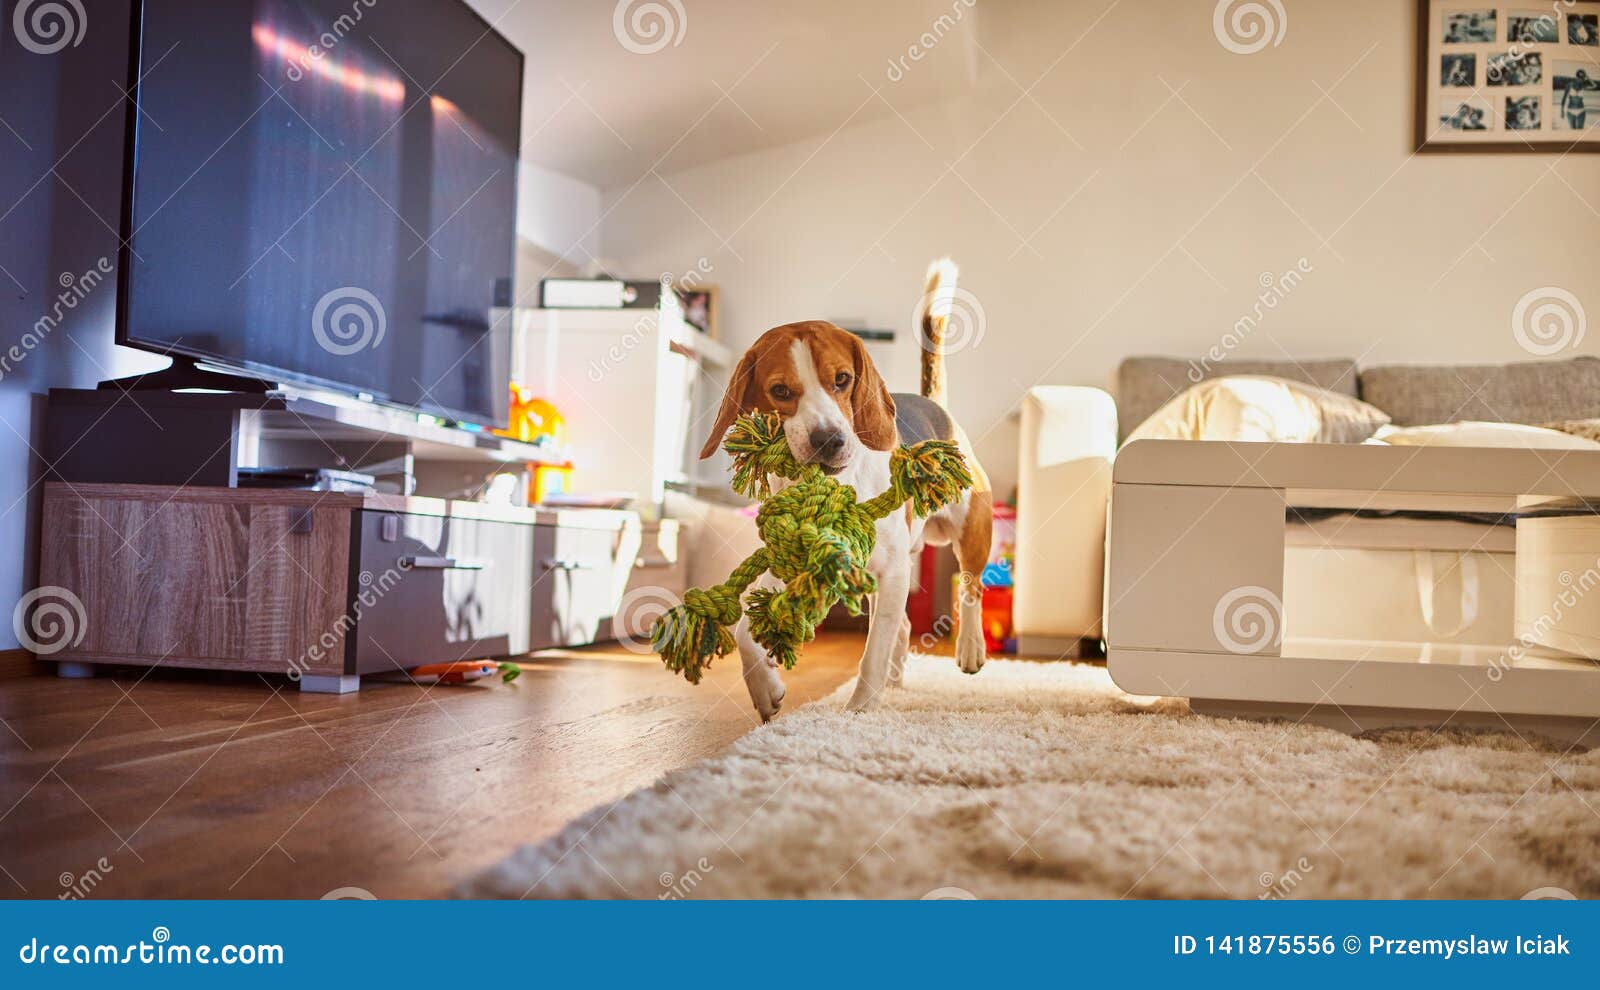 dog beagle fetching a green rope indoors